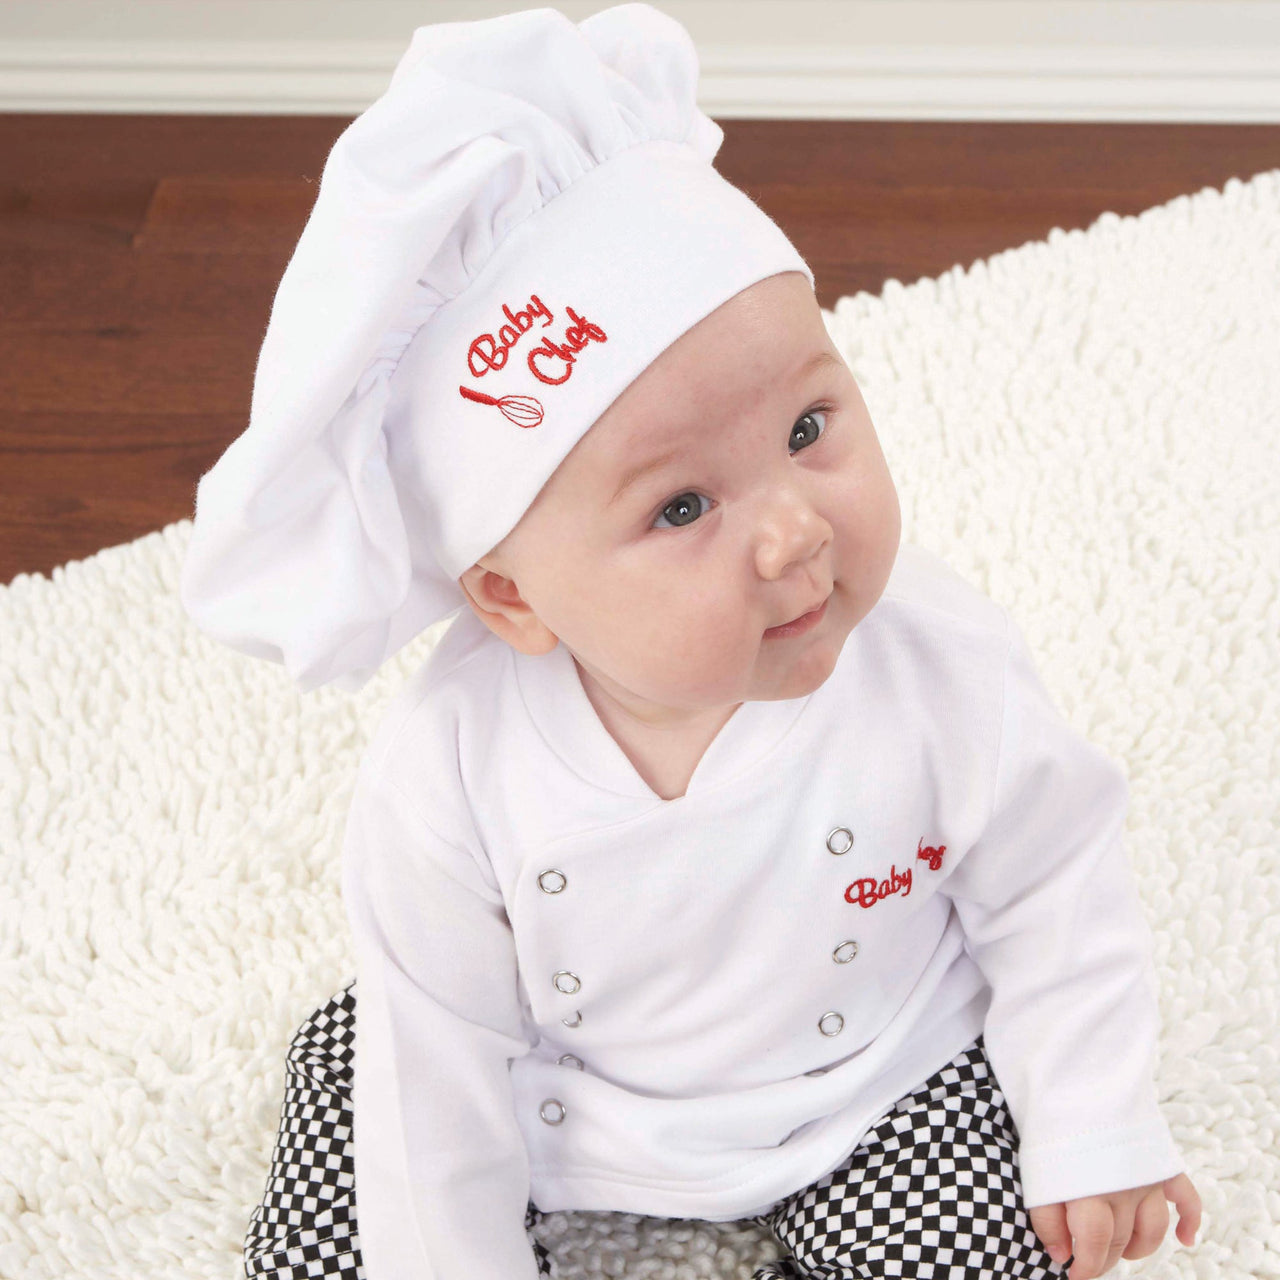 Big Dreamzzz Baby Chef 3-Piece Layette Set (Personalization Available)